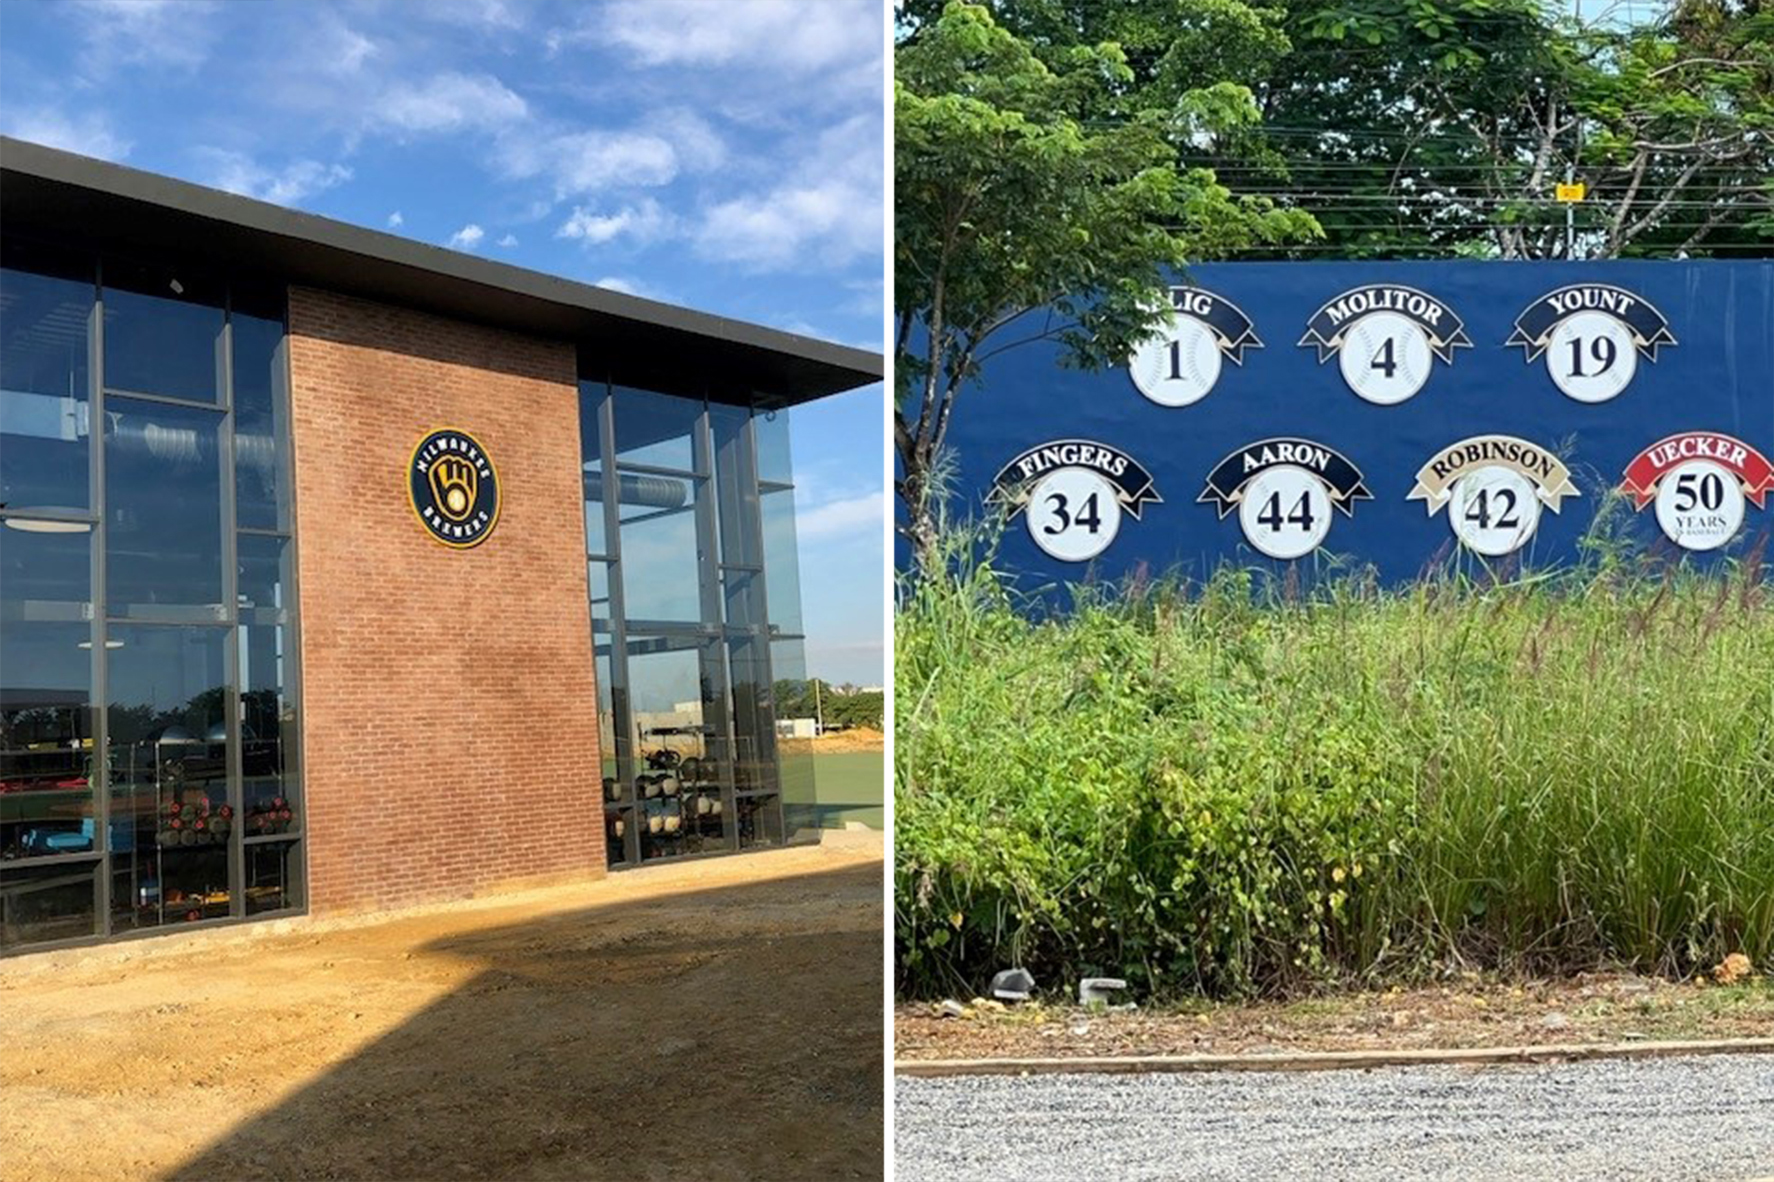 Left: Gym / Right: Retired numbers